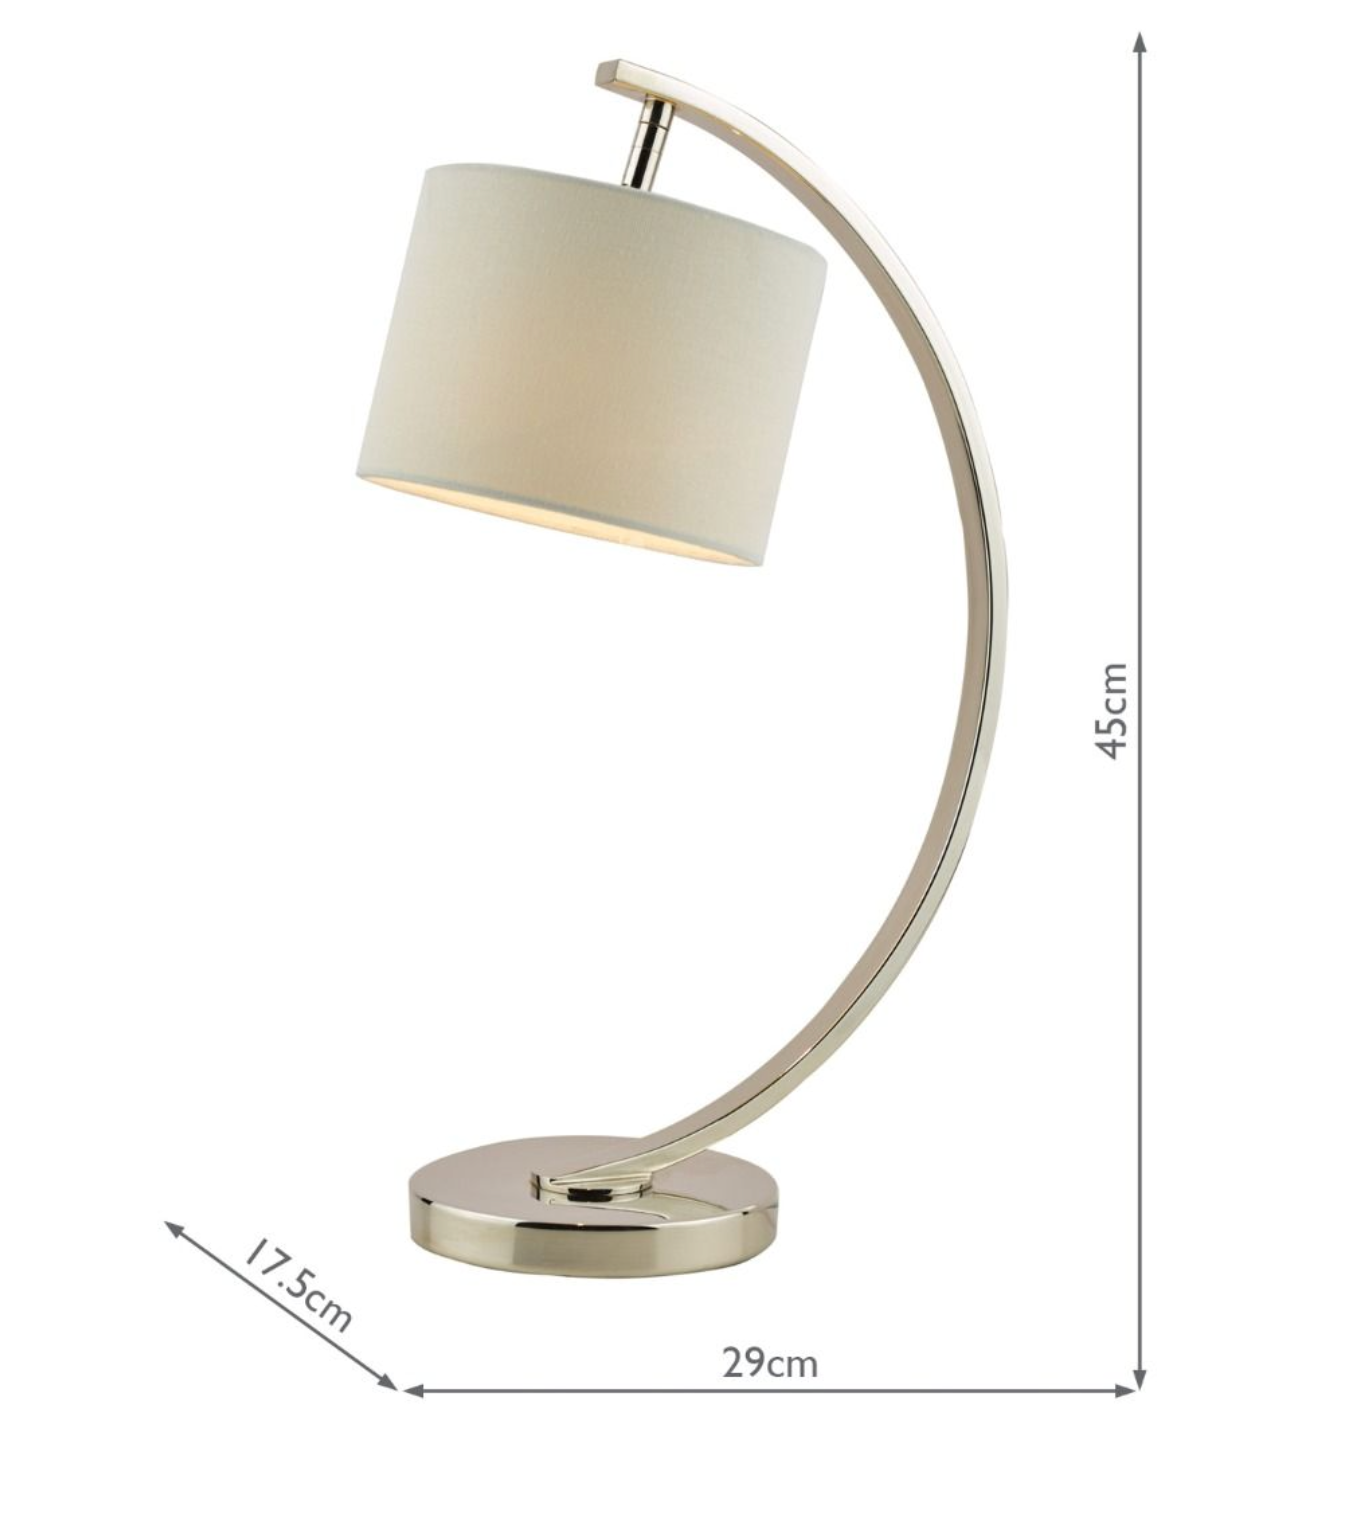 Chrome Desk Lamp with WHITE Shade - ID 11528